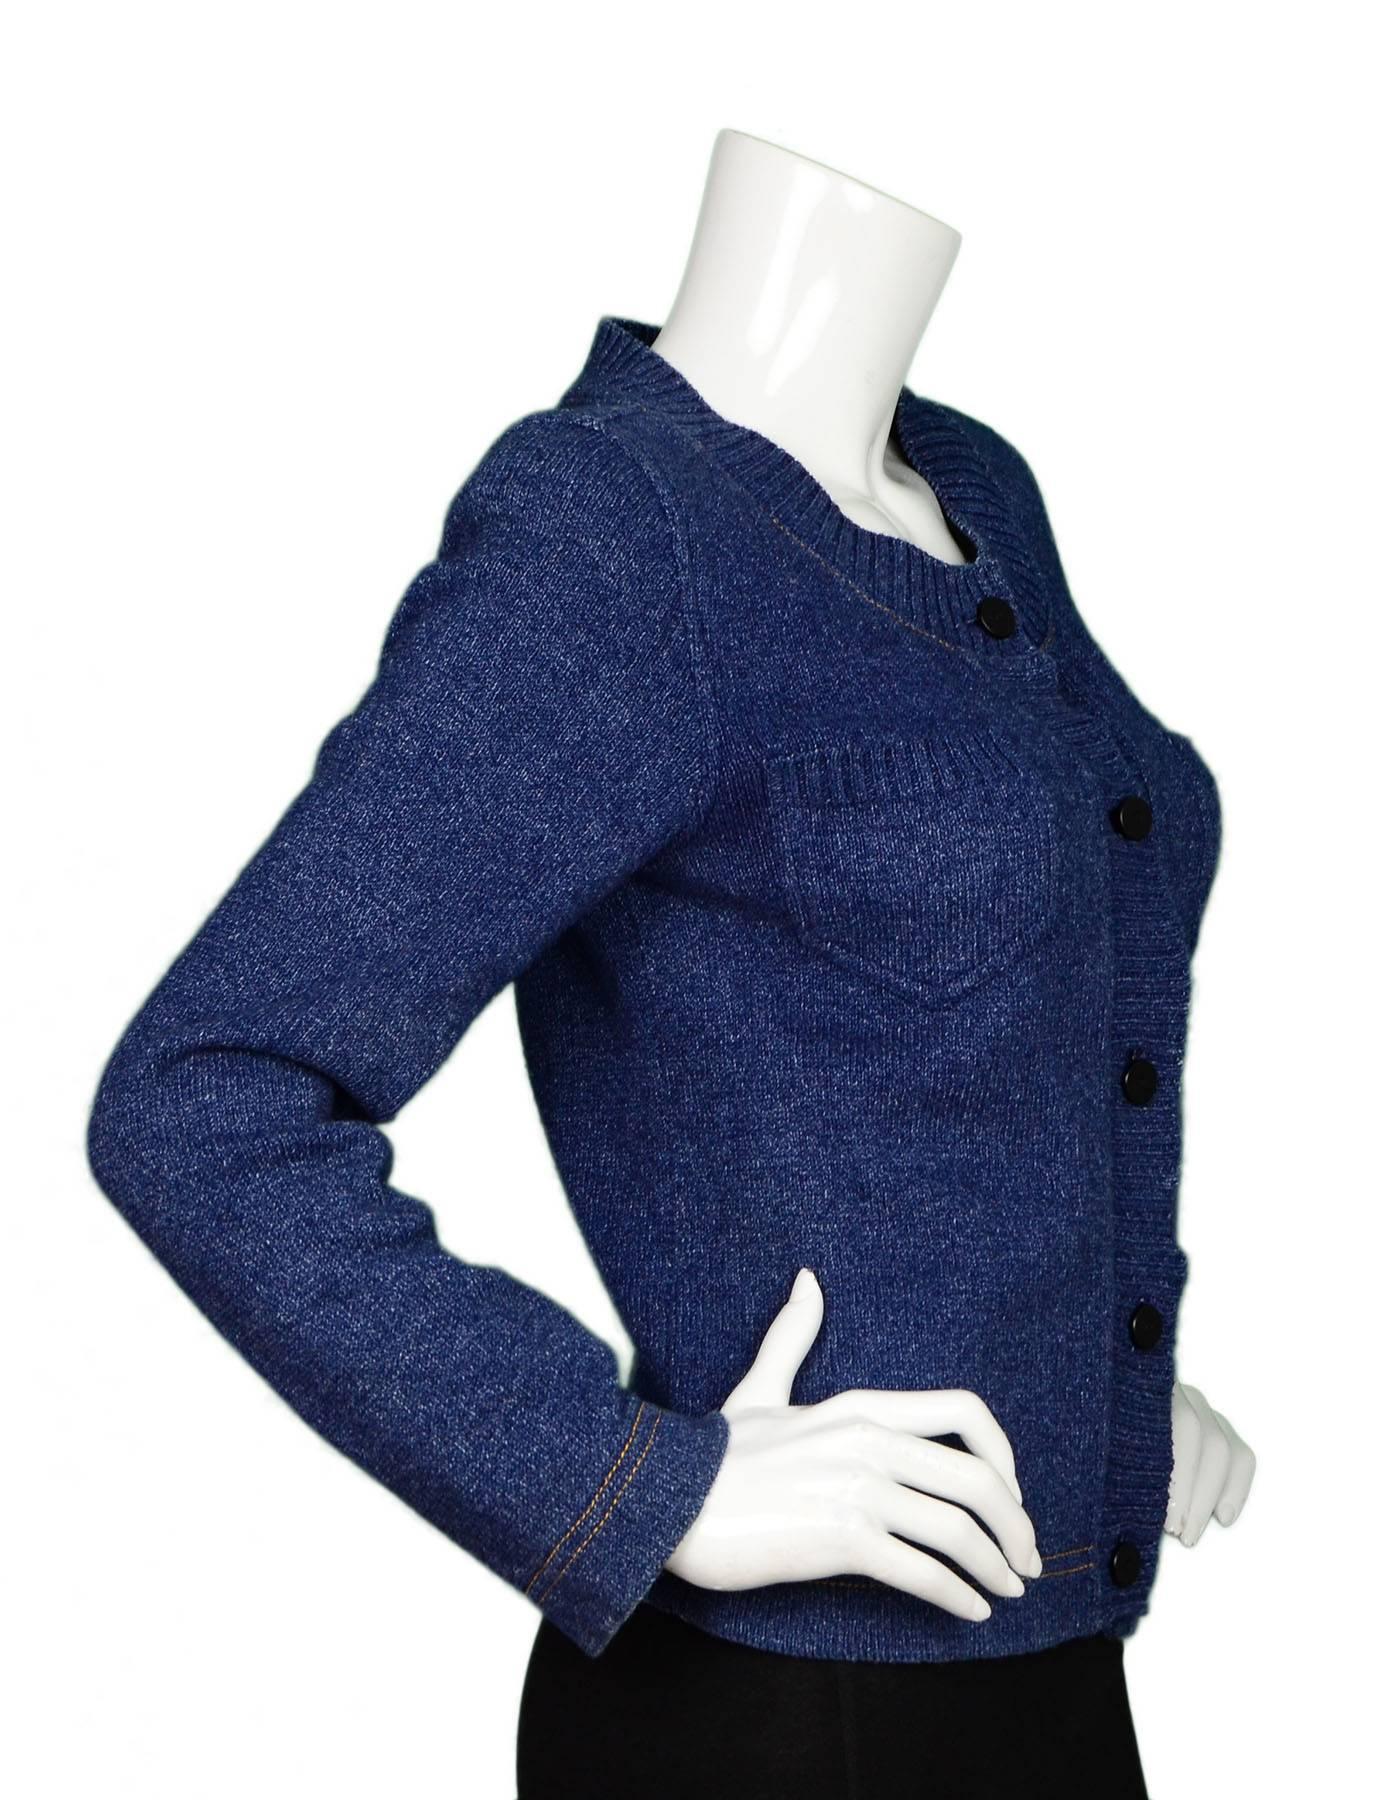 Chanel Blue Denim Knit Cardigan Sweater 
Features light padding in shoulders for a more structured look
Made In: Italy
Year of Production: 1999
Color: Blue
Composition: 100% cotton
Lining: None
Closure/Opening: Button down front
Exterior